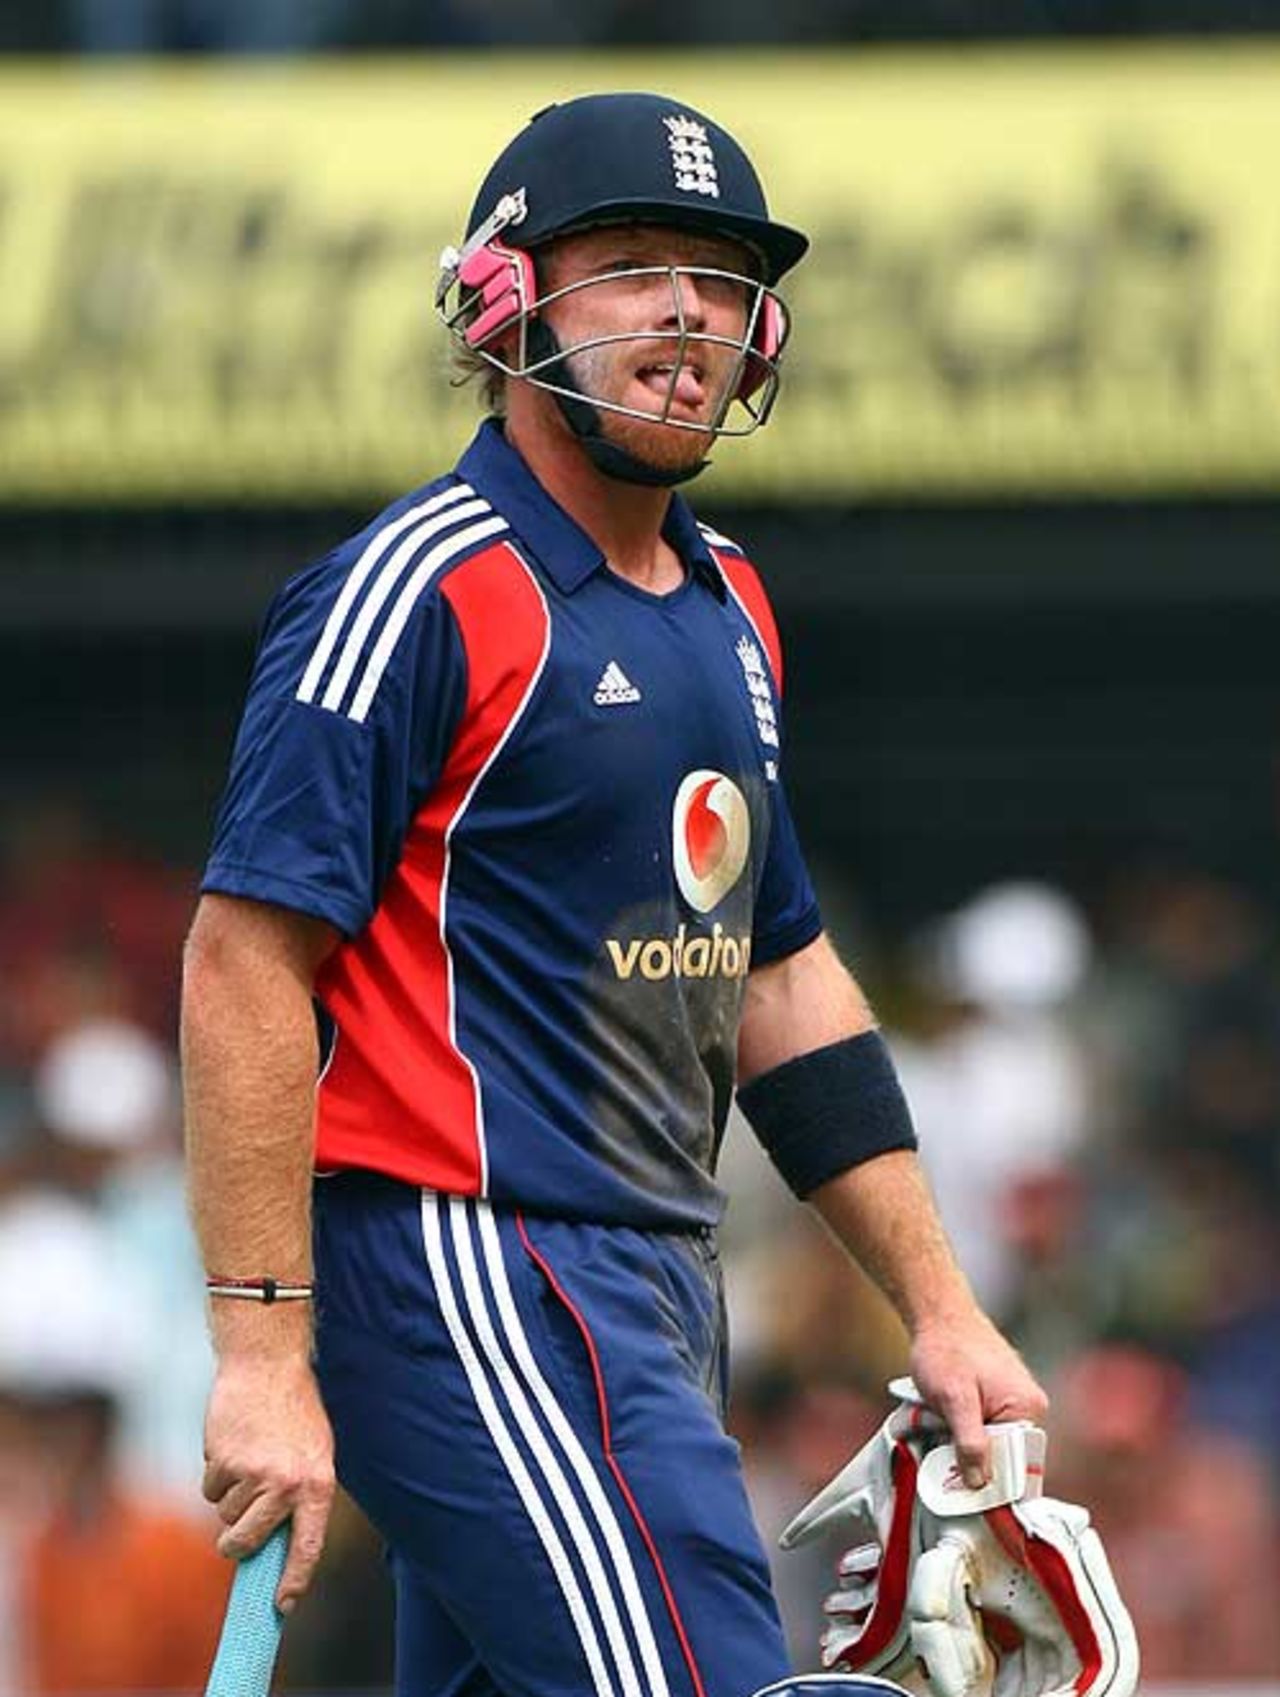 Ian Bell was run out for 1 when England began chasing 293, India v England, 2nd ODI, Indore, November 17, 2008